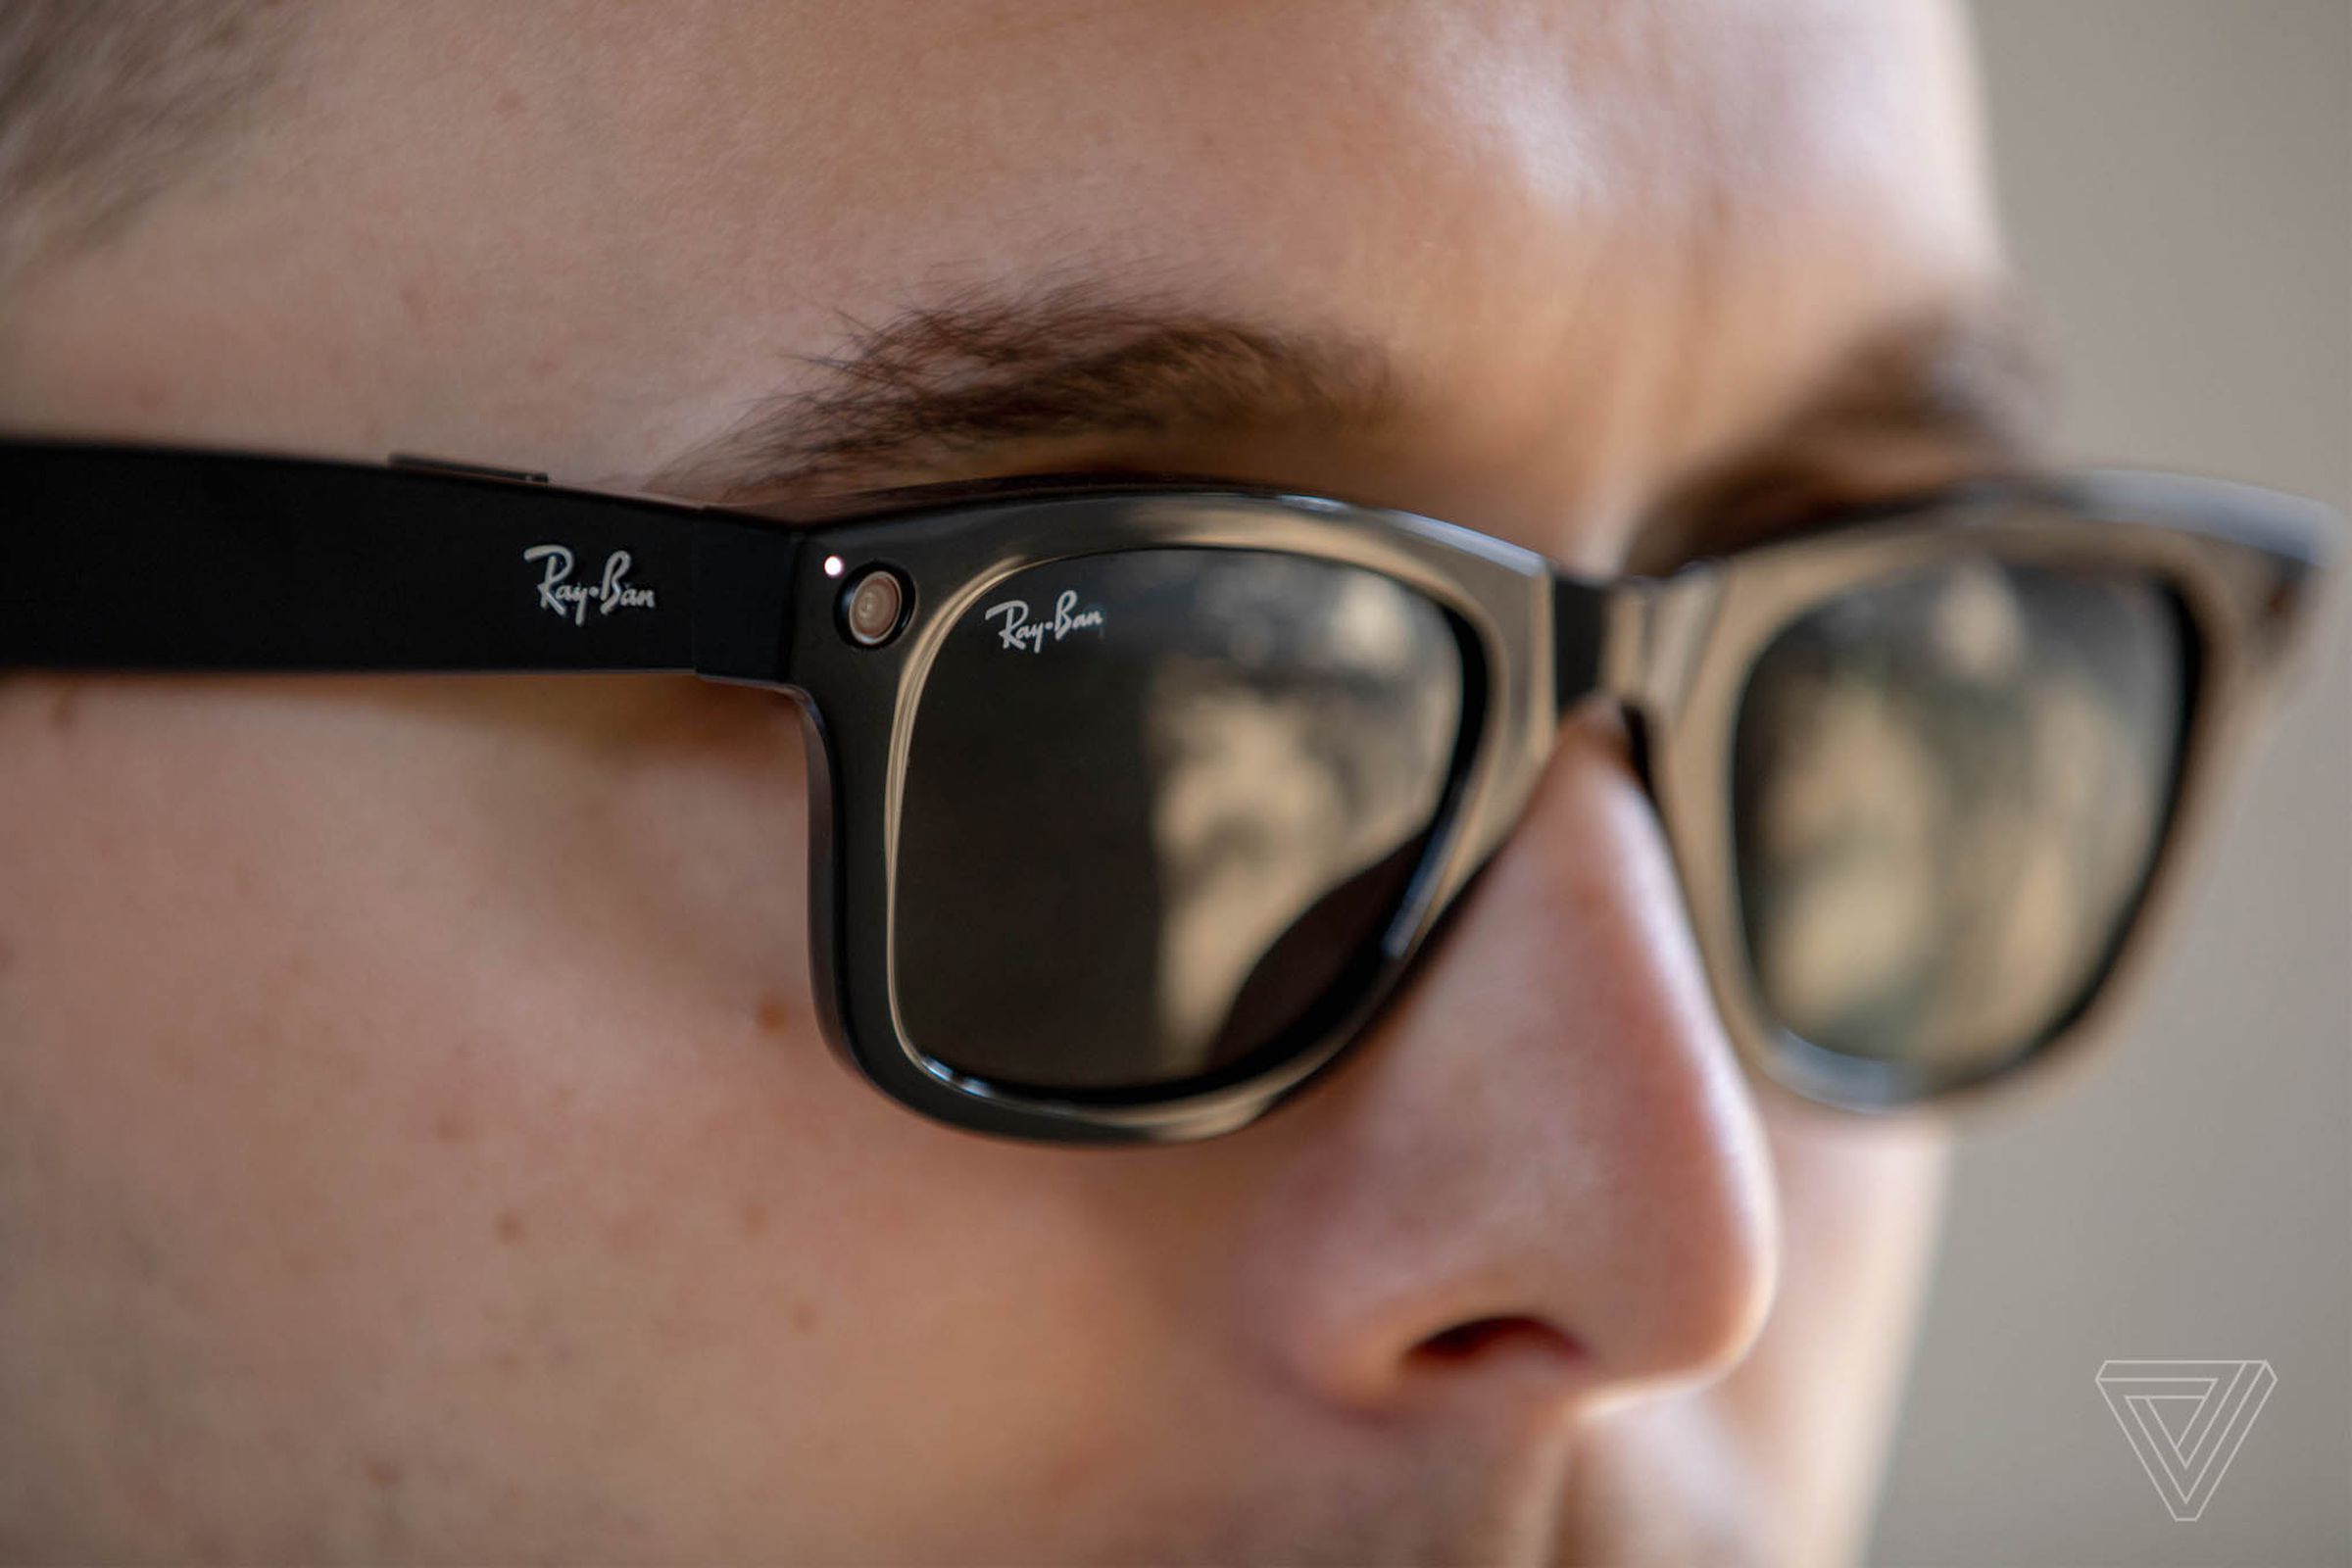 Meta’s Ray-Ban Stories, released in 2021, have two cameras for capturing photos and videos.